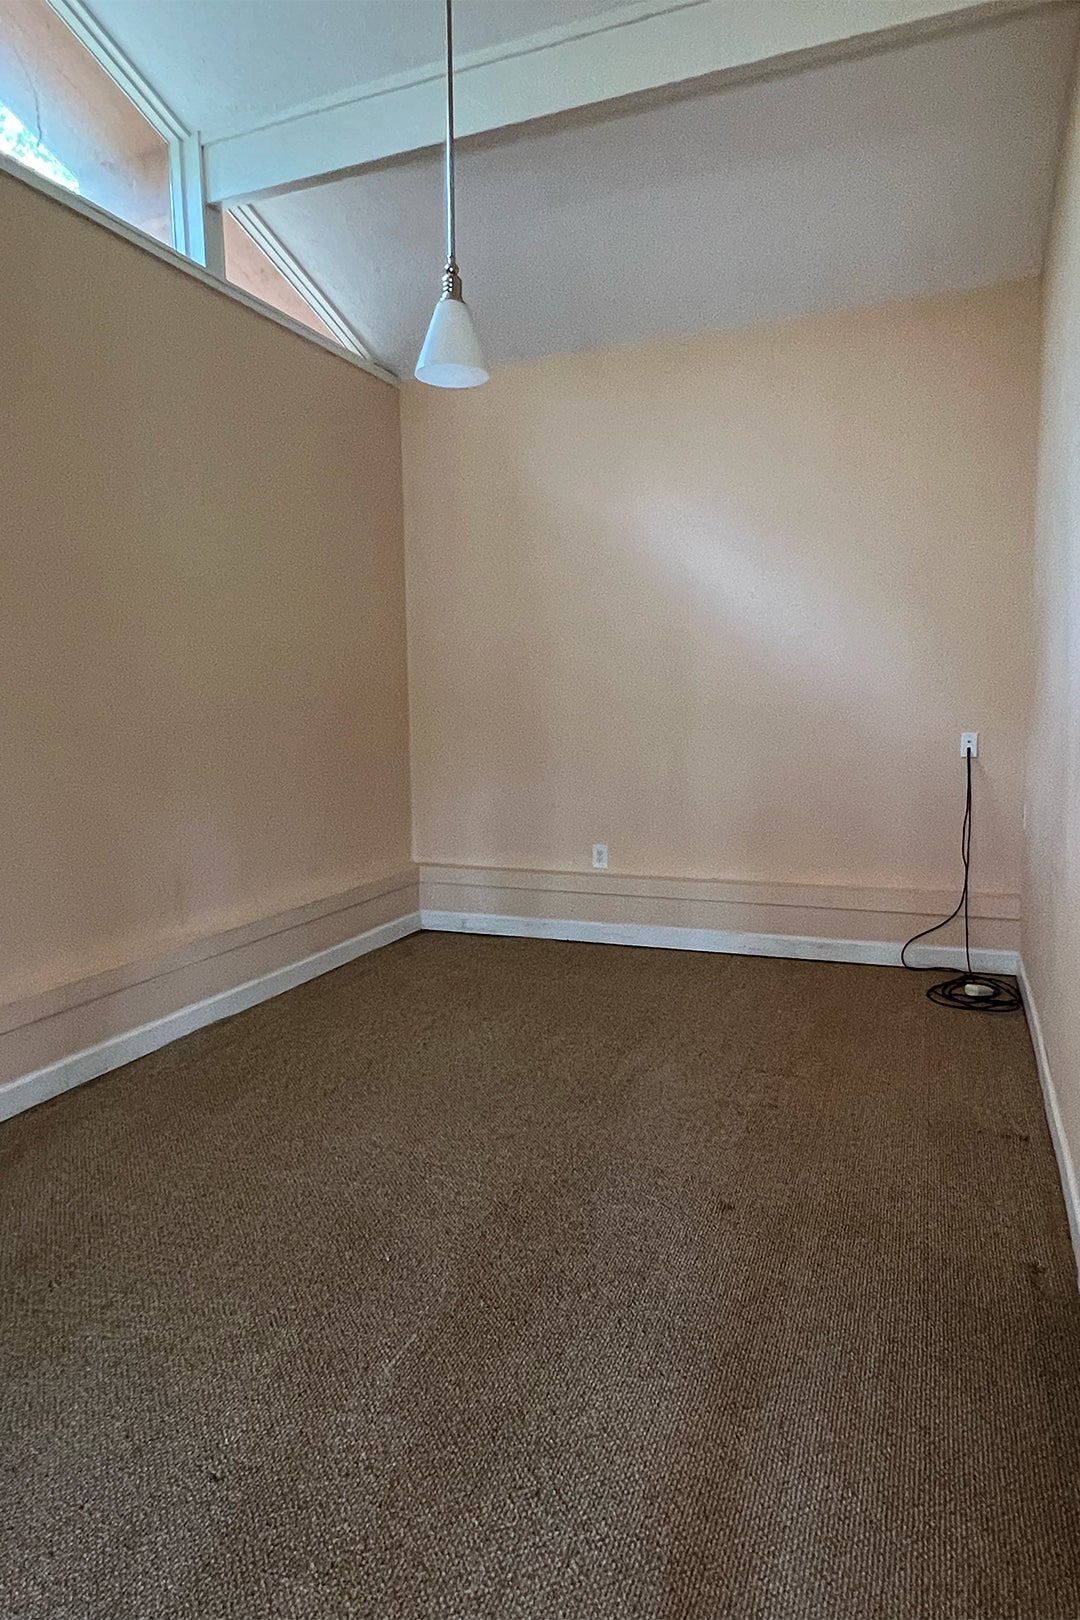 empty room with beige walls and carpet